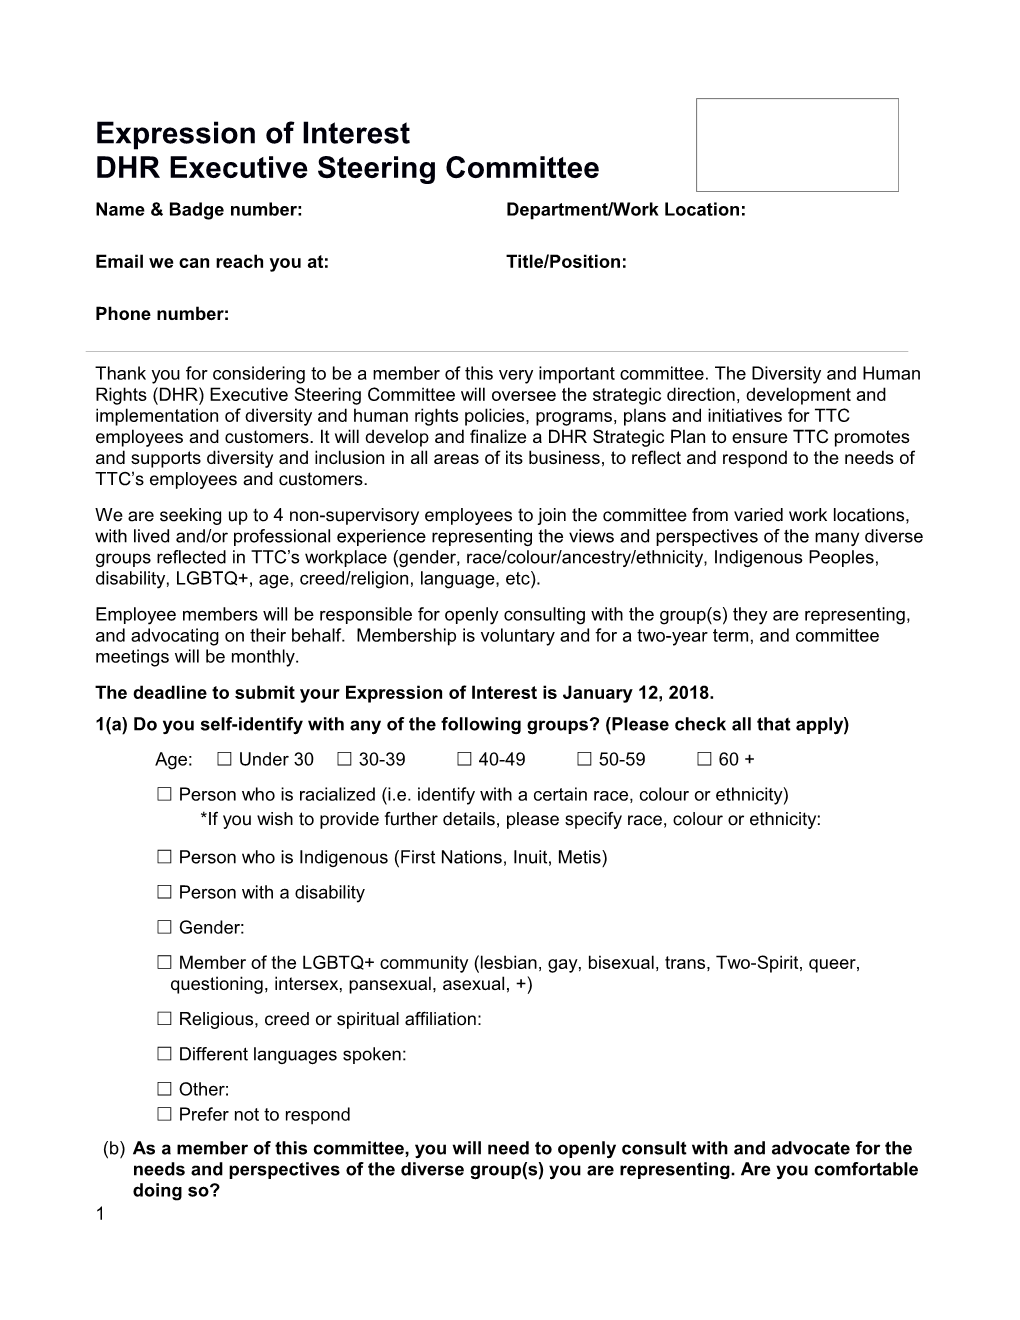 Expression of Interest Diversity and Human Rights Executive Comittee